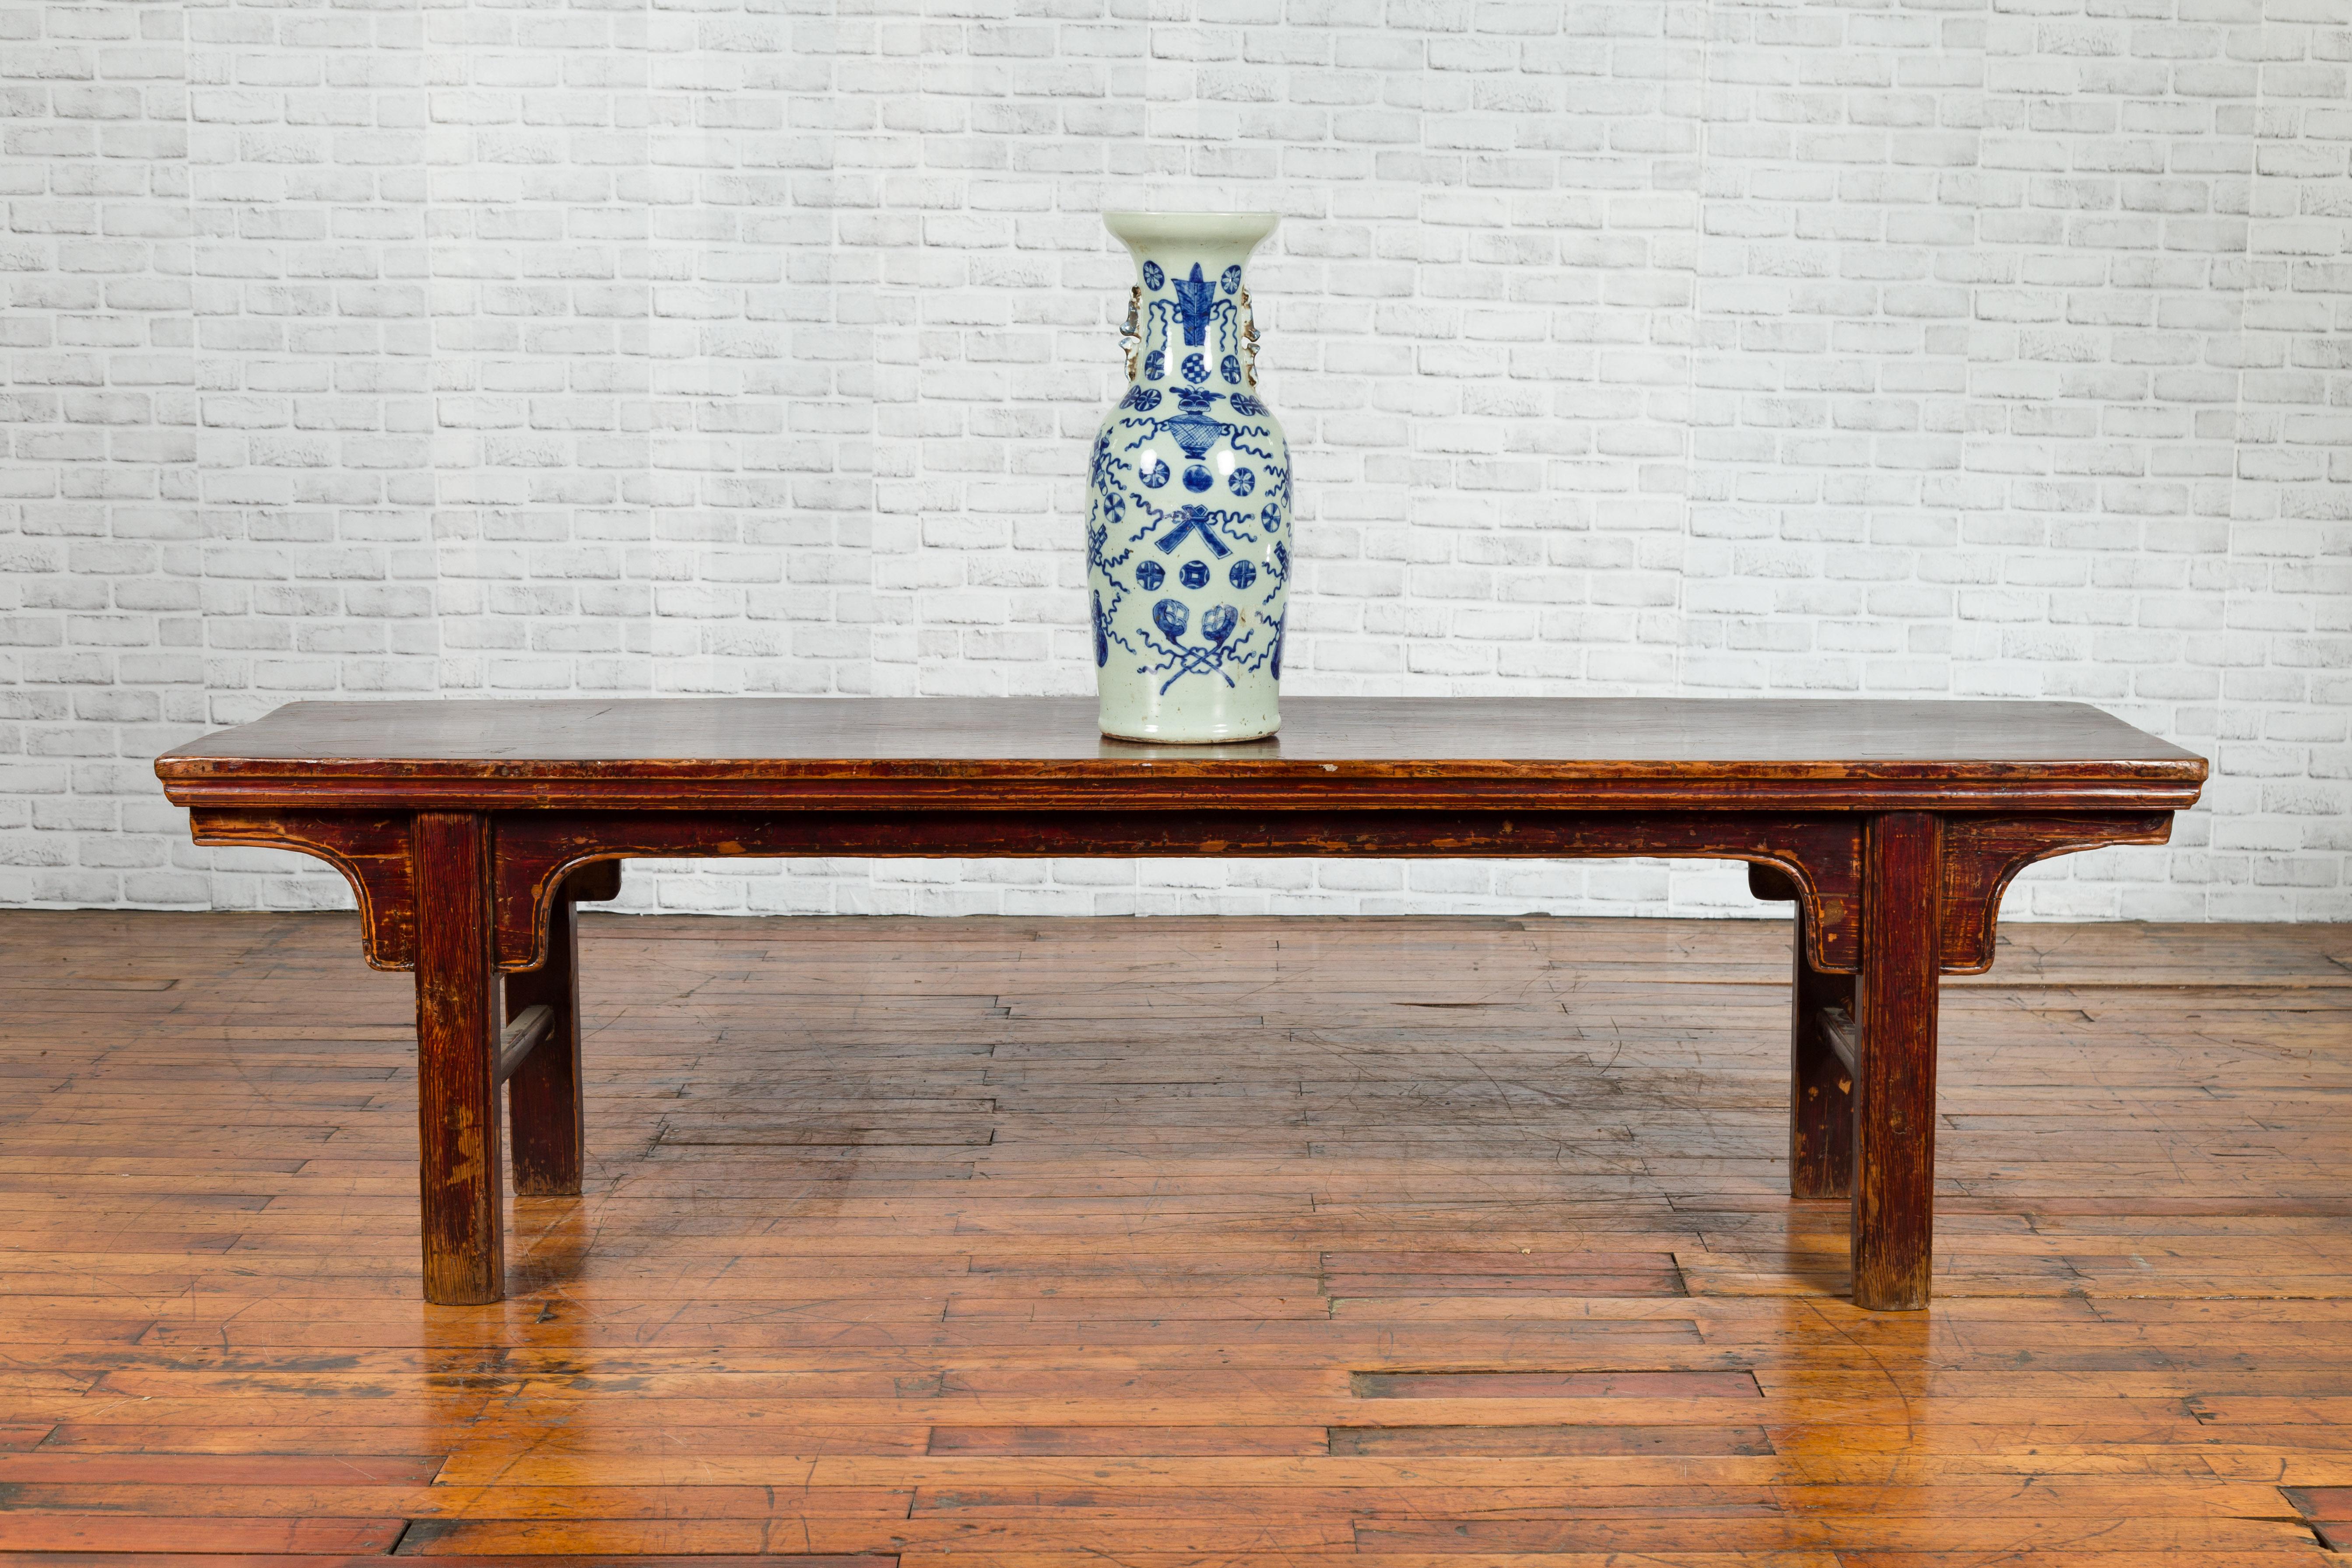 A Chinese Qing Dynasty period coffee table from the 19th century, with nicely distressed patina. Created in China during the Qing Dynasty, this low table, originally used as a bench, features a rectangular single plank top sitting above a simply